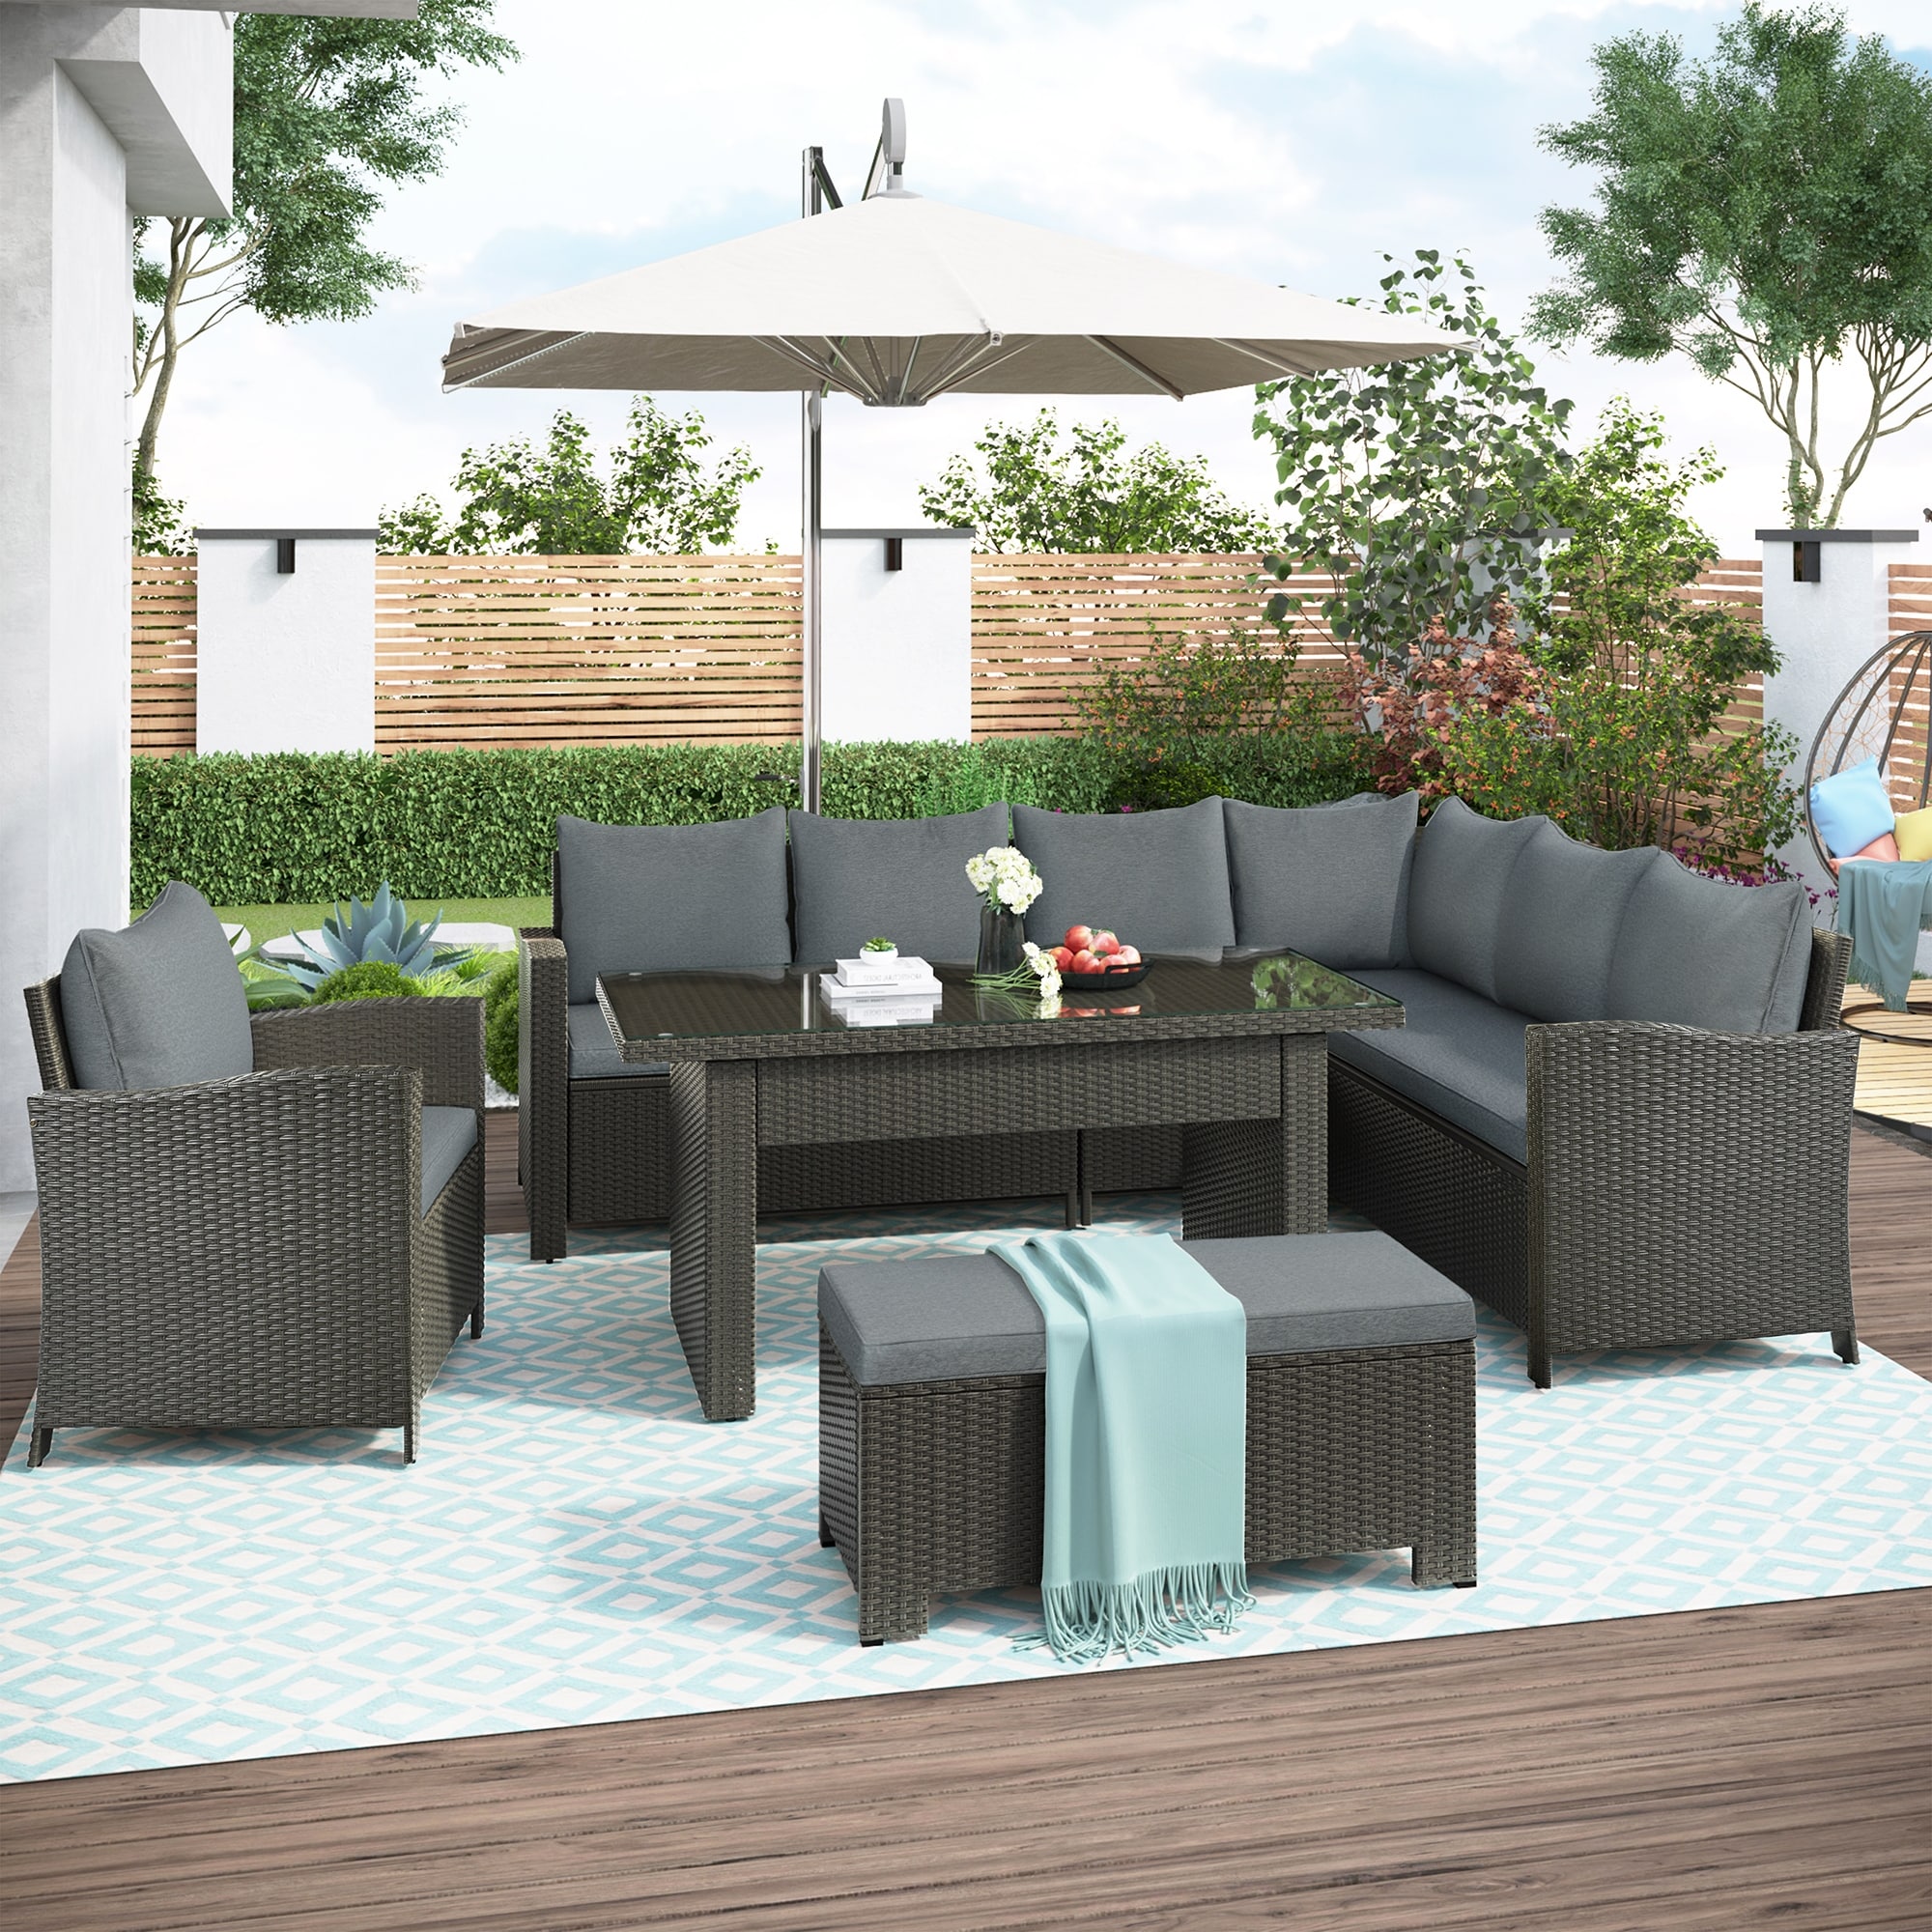 6 Piece Outdoor Sturdy Pe Rattan Patio Furniture Set  Outdoor Sectional Sofa Set With Coffee Table  Bench And Cushions